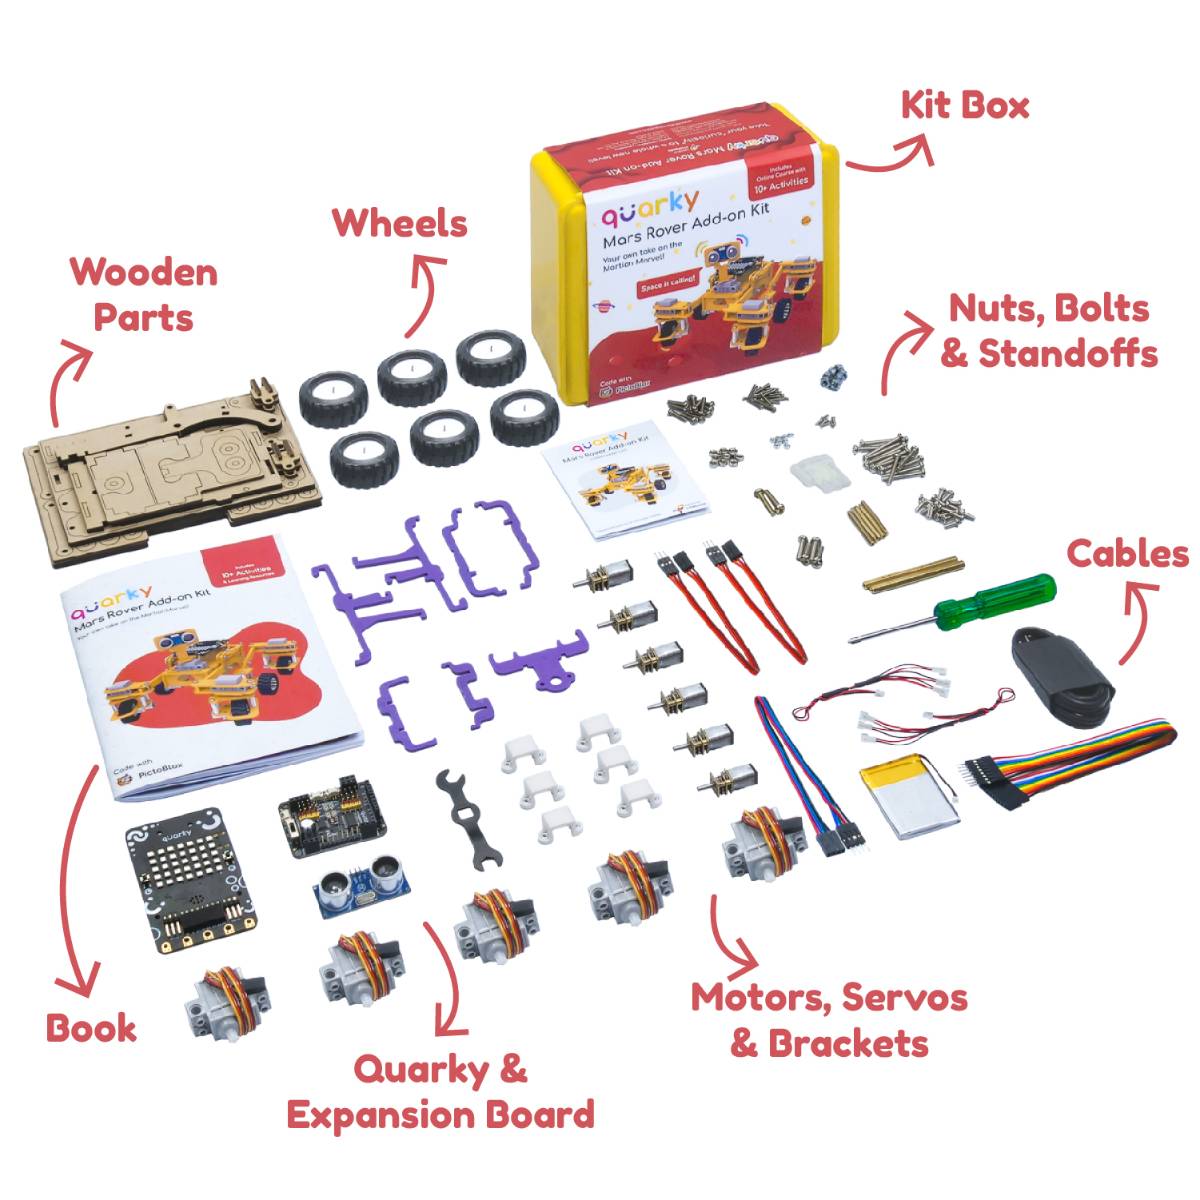 Quarky Mars Rover Add-on Kit components - Wheels, Motors, Servos & Brackets, Quarky Expansion Board, and more for creating a mars rover of our own.